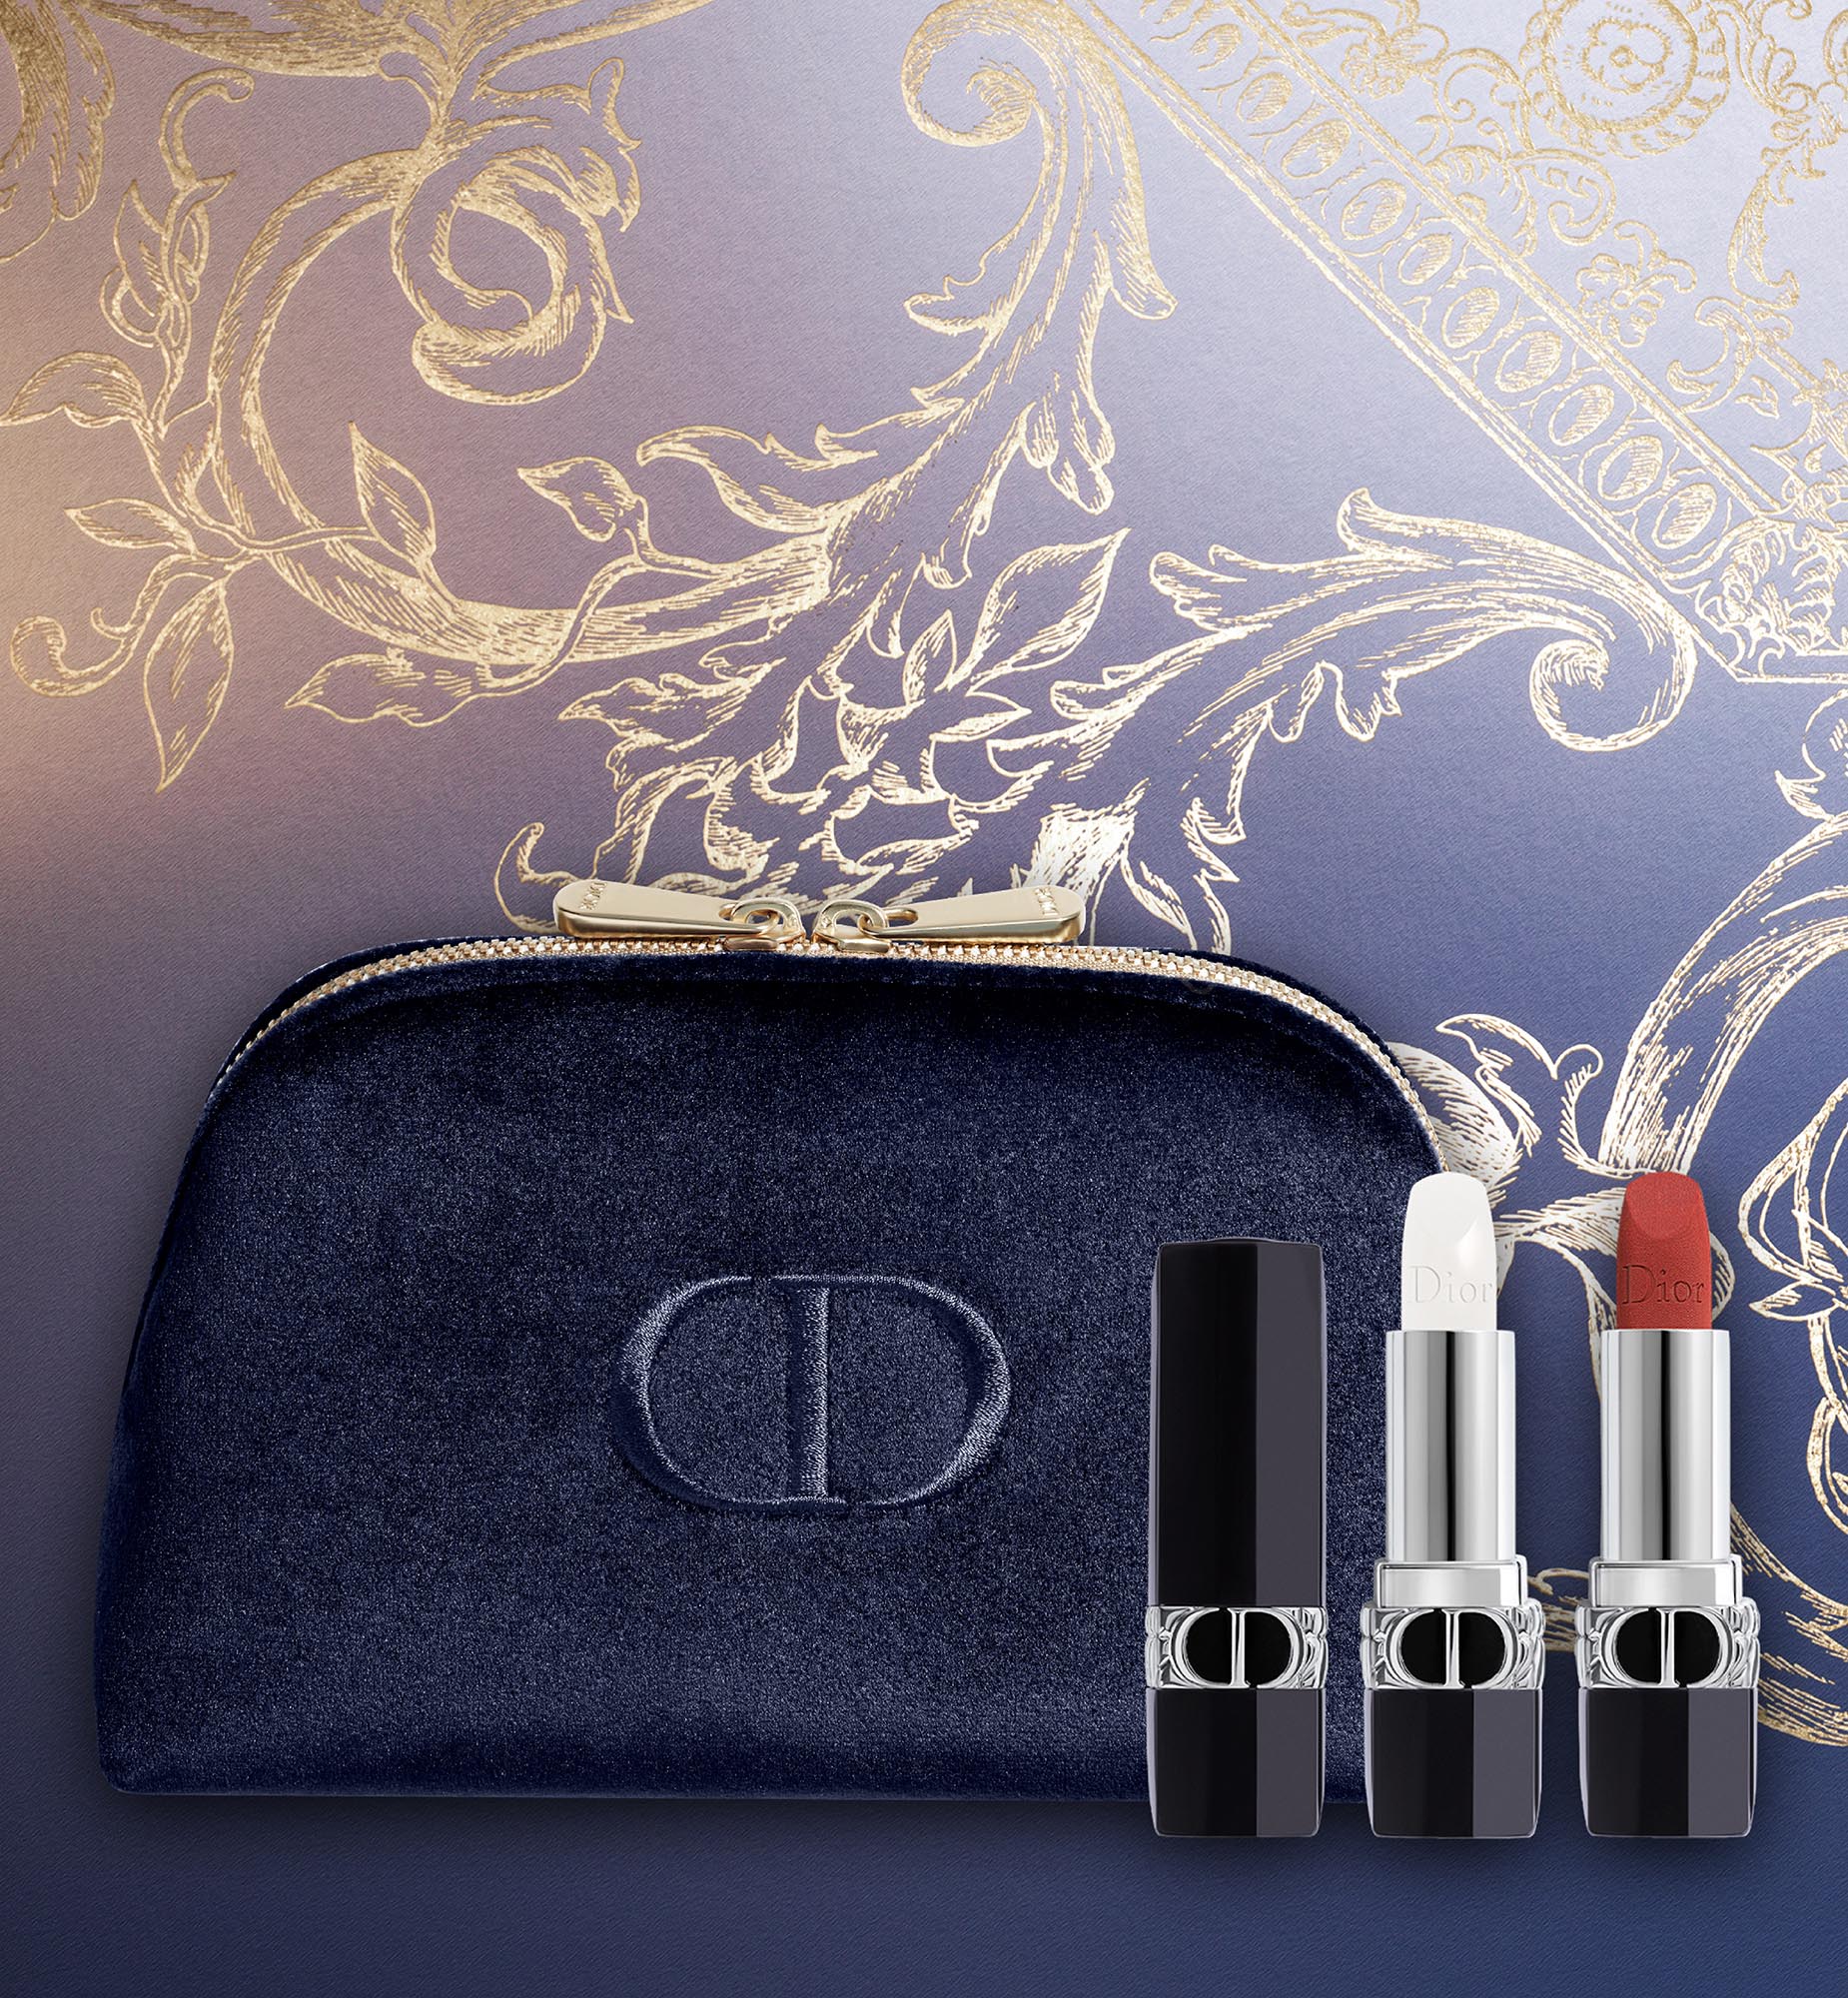 ROUGE DIOR COUTURE LIP ESSENTIALS——Rouge Dior Set - Lipstick, Lip Balm and Couture Pouch